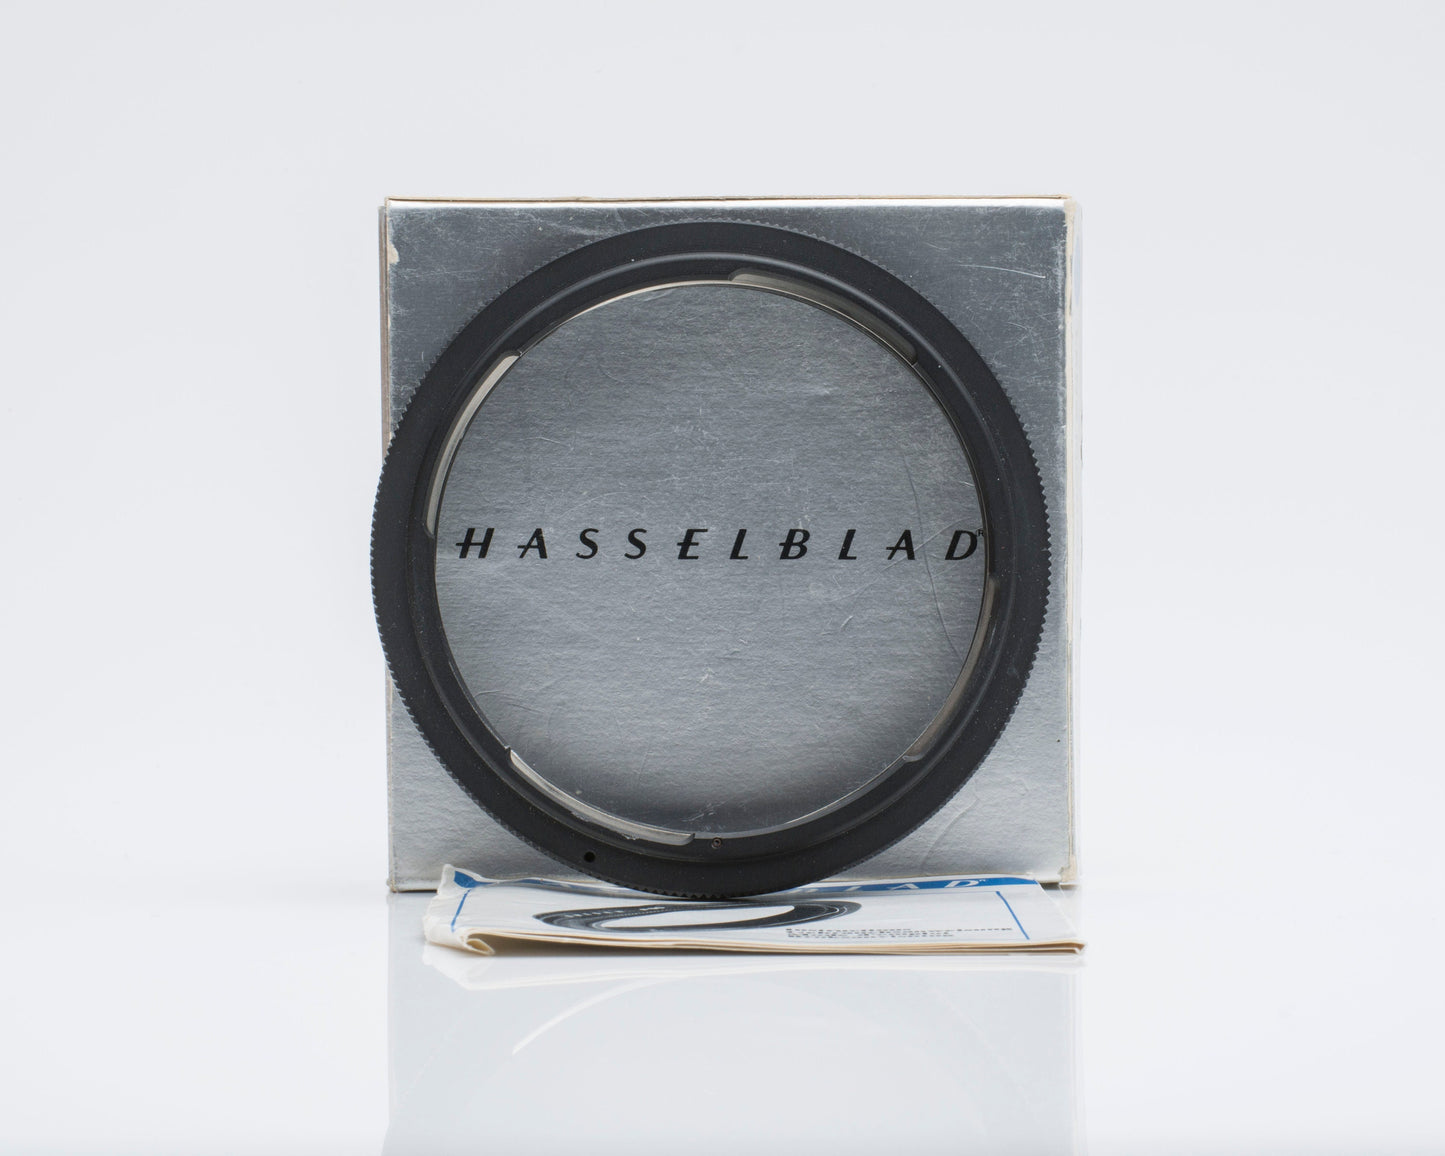 Hasselblad Bay 60 Lens Mounting Ring 40681